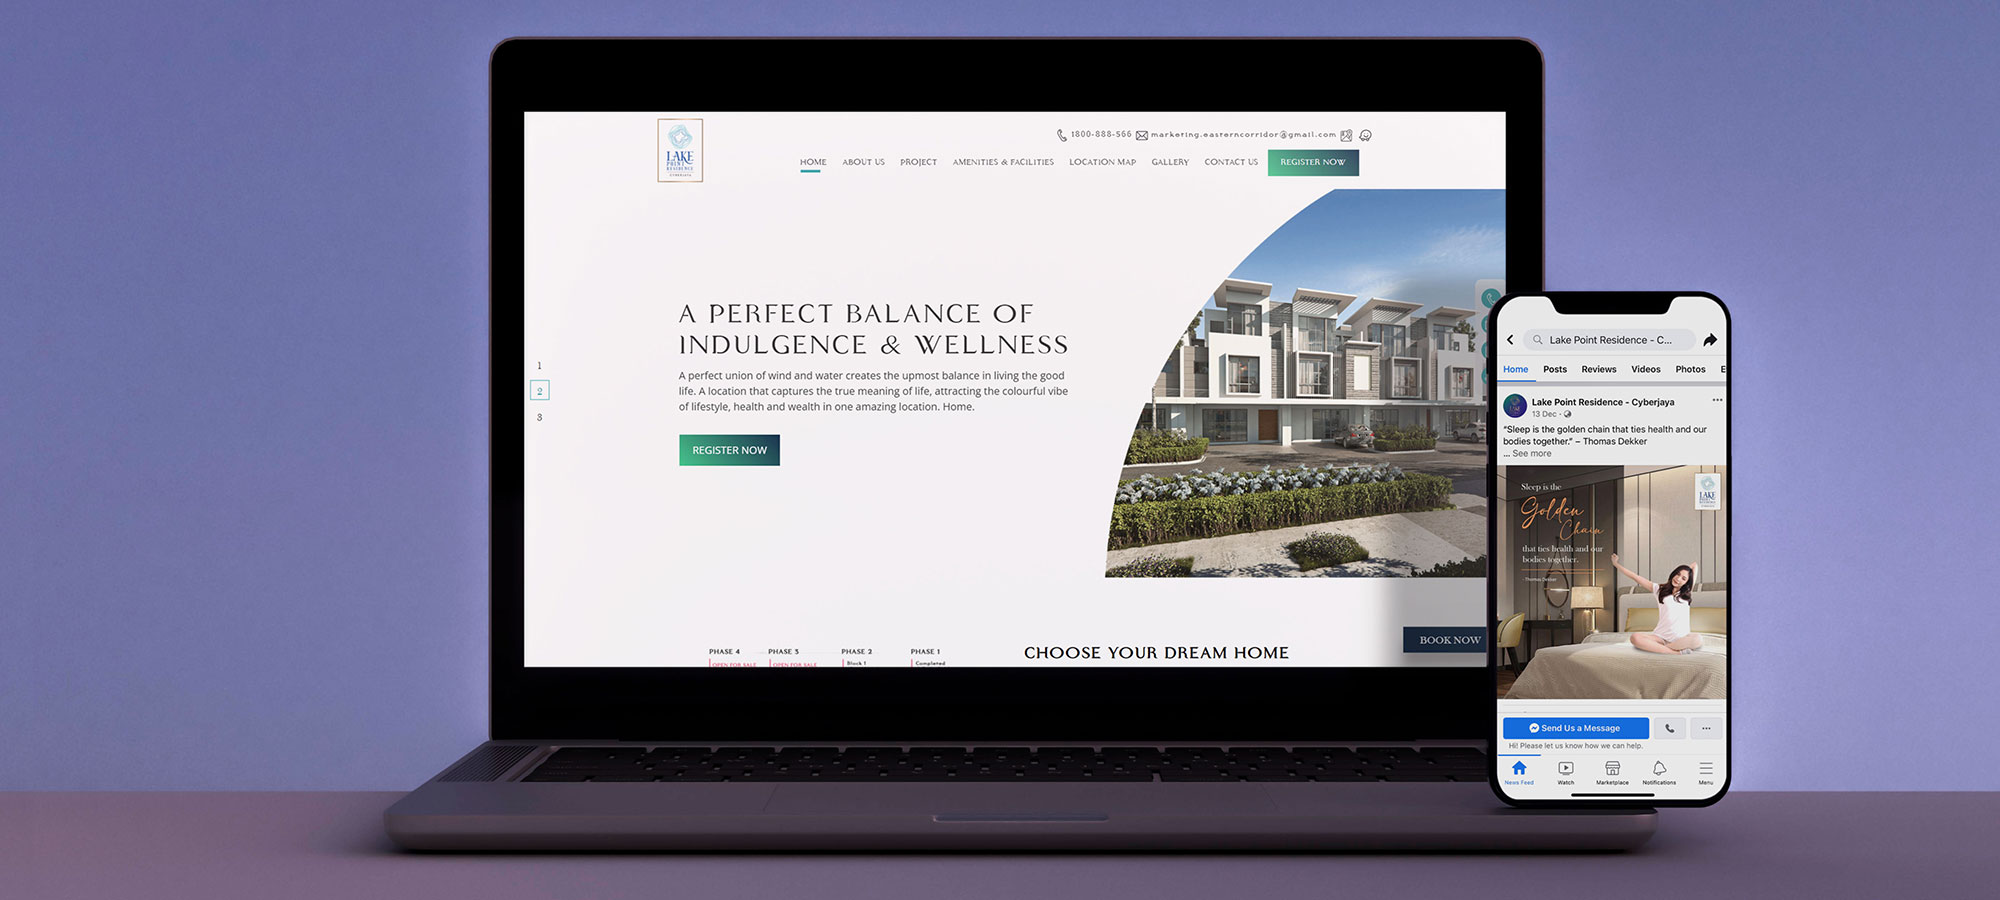 Lake Point Residence by Eastern Corridor website and social media mockup